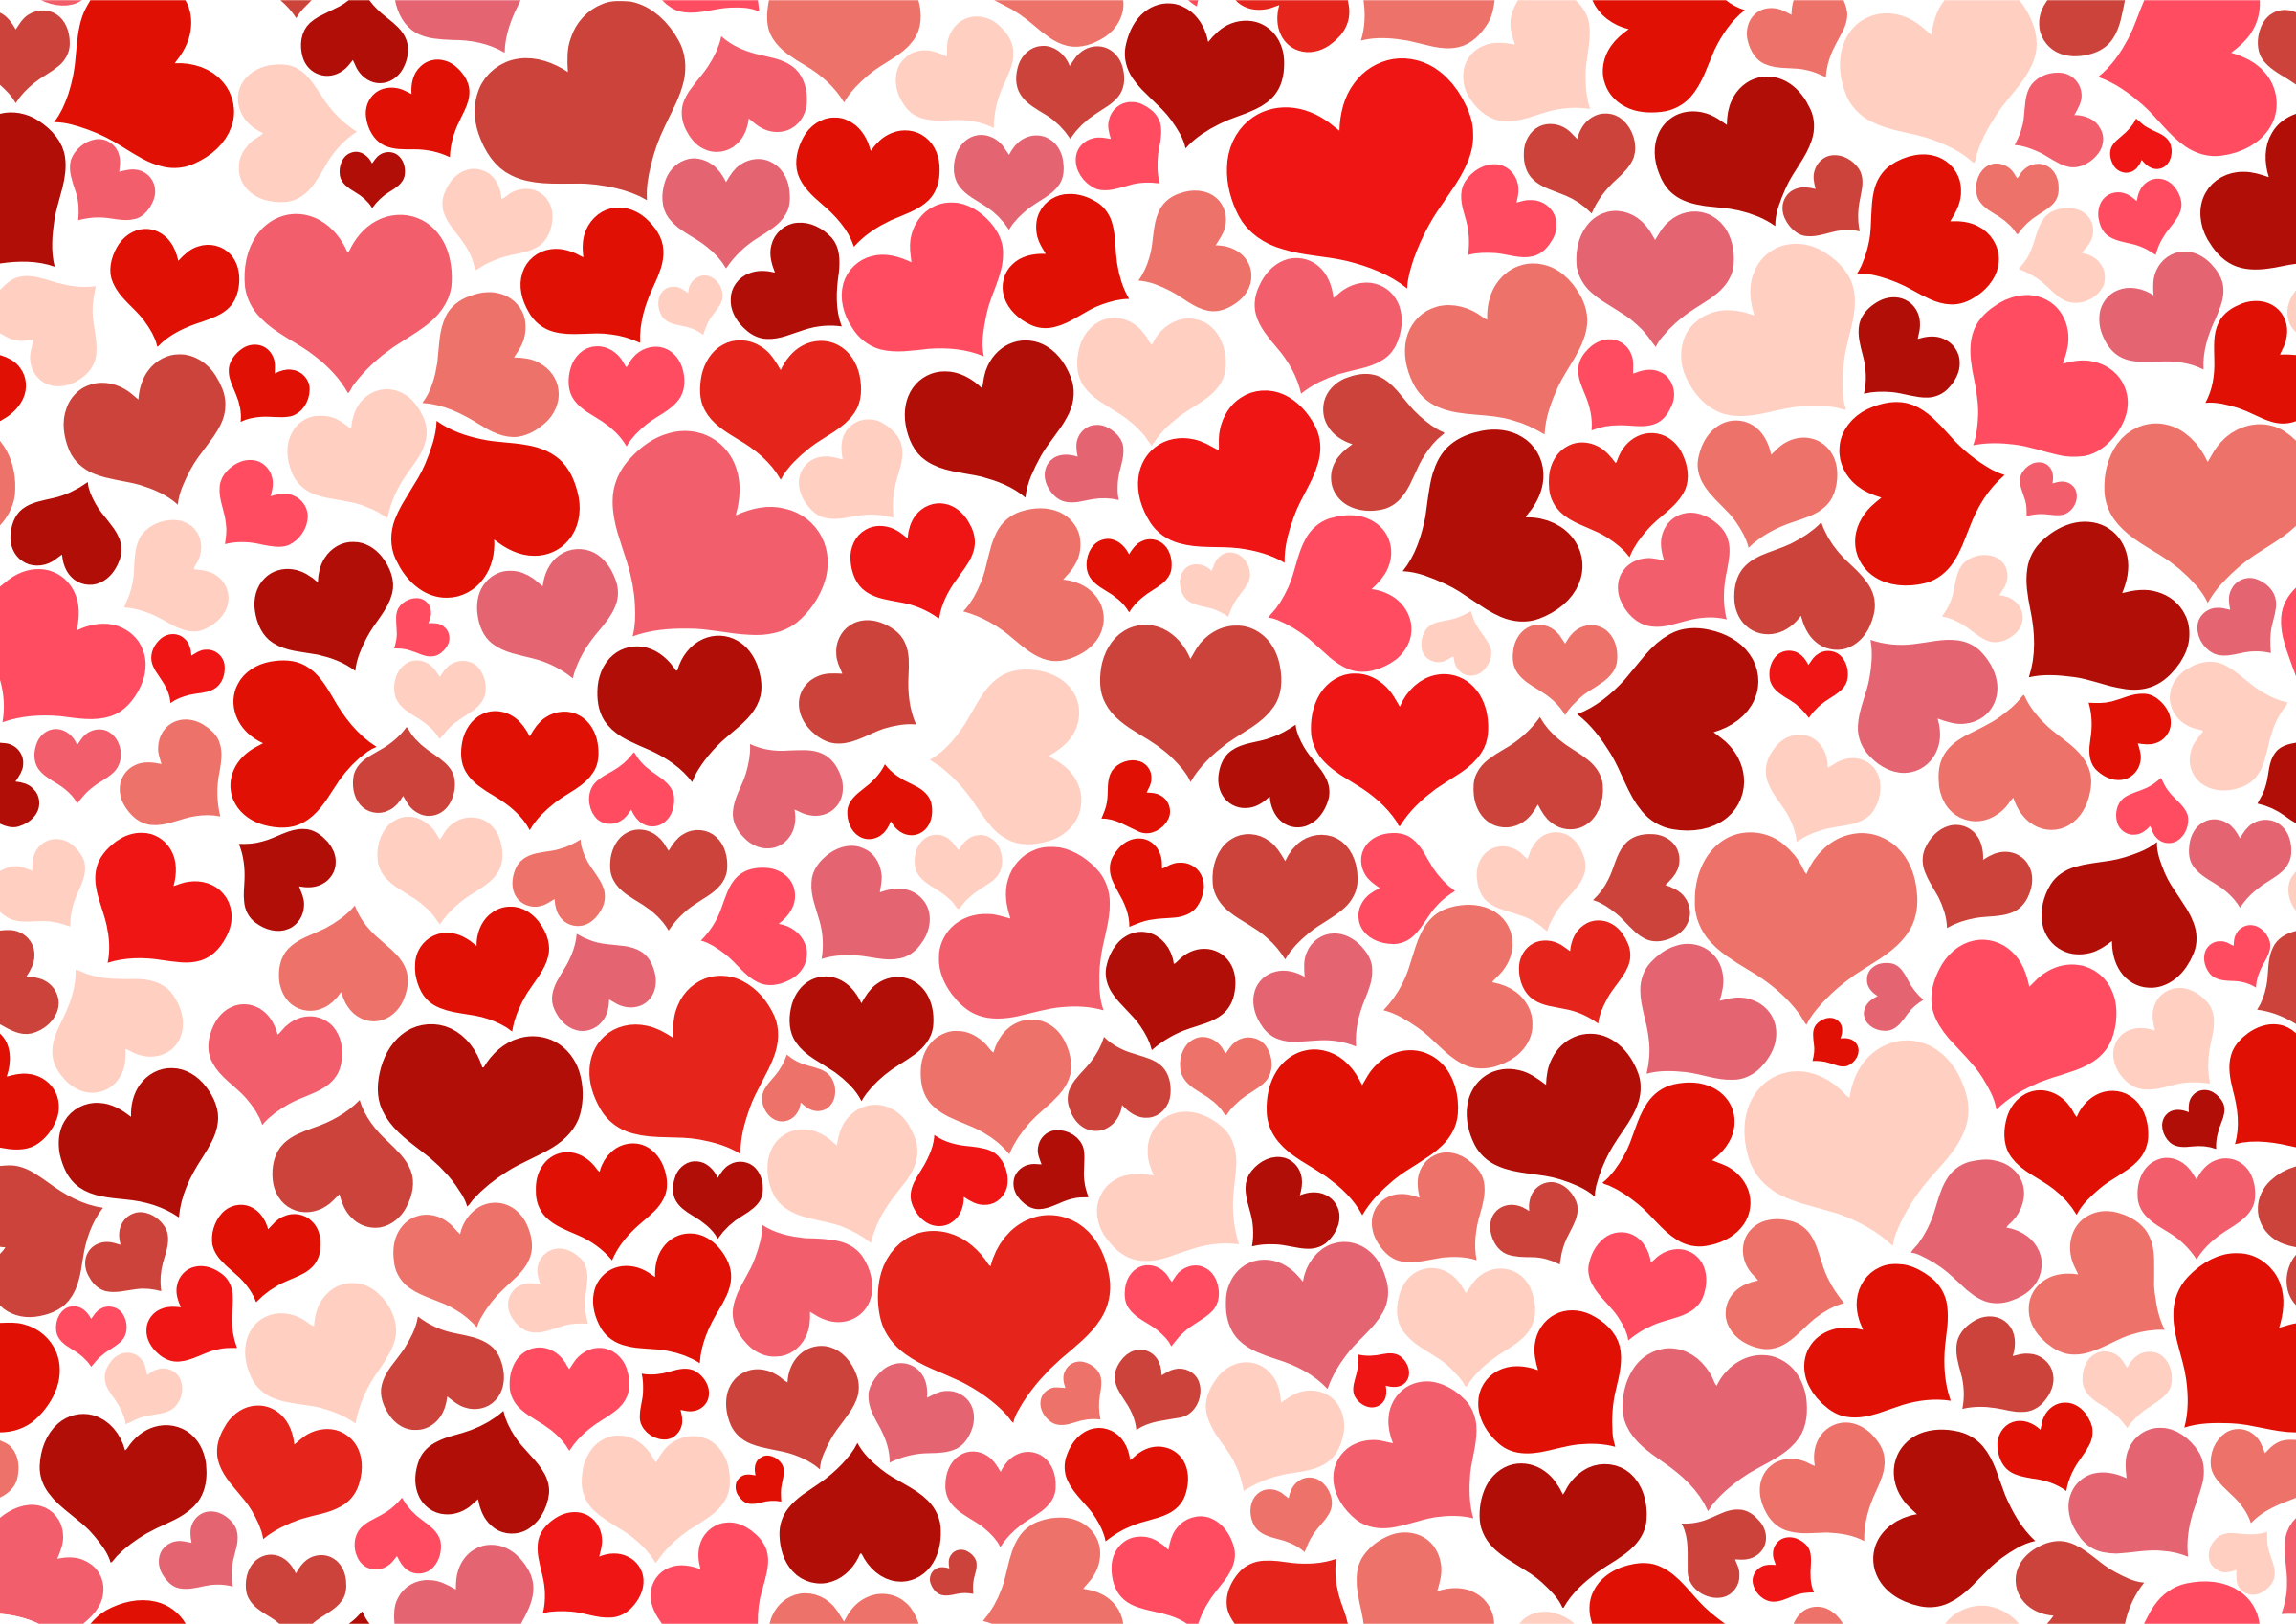 Colorful Heart Background - Heart Background High Resolution - HD Wallpaper 